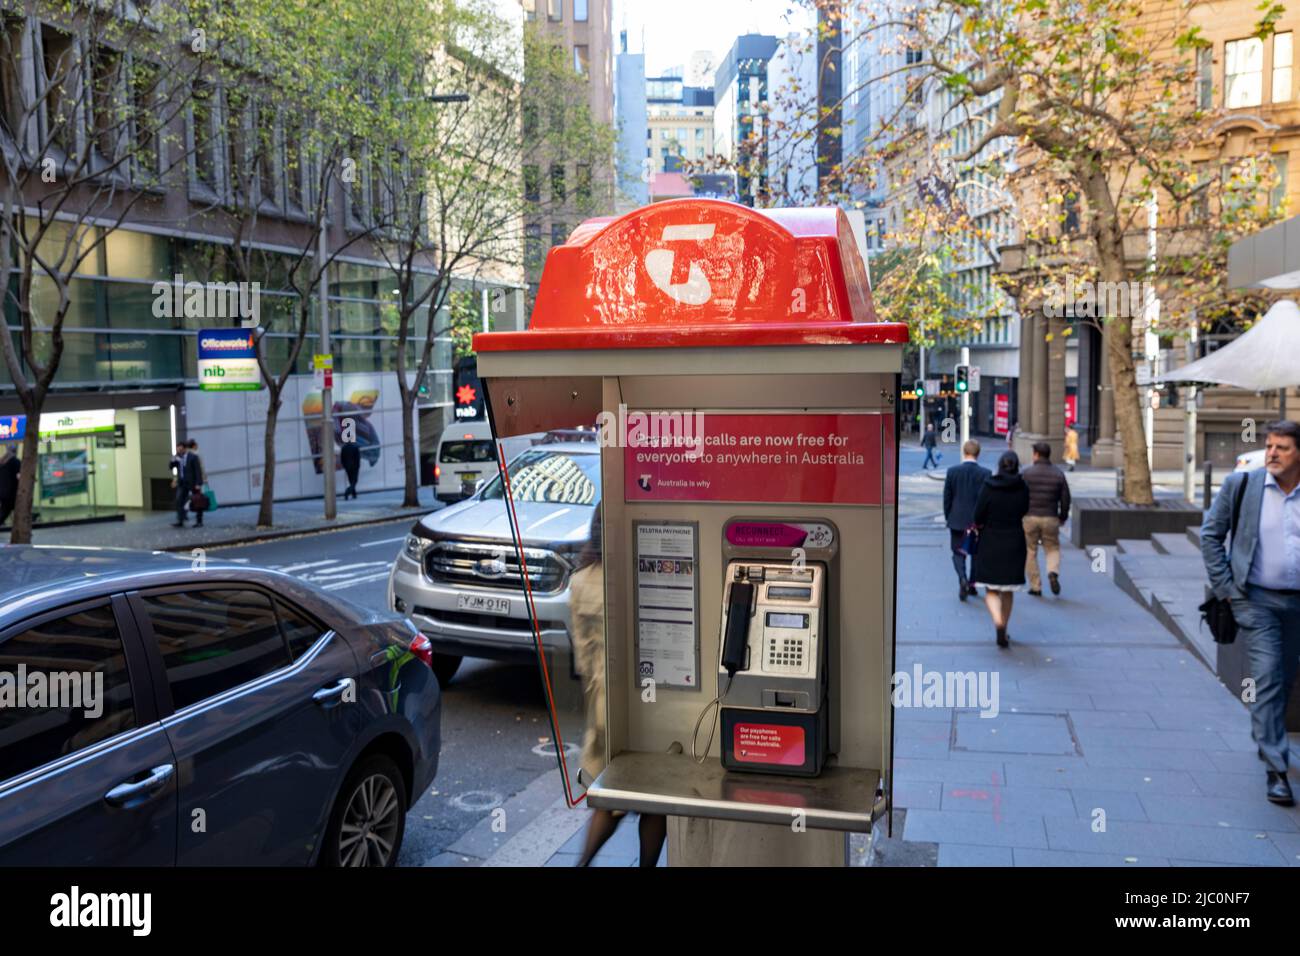 Telstra payphone booth with telephone handset for making telephone calls, in Sydney city centre,NSW,Australia Stock Photo